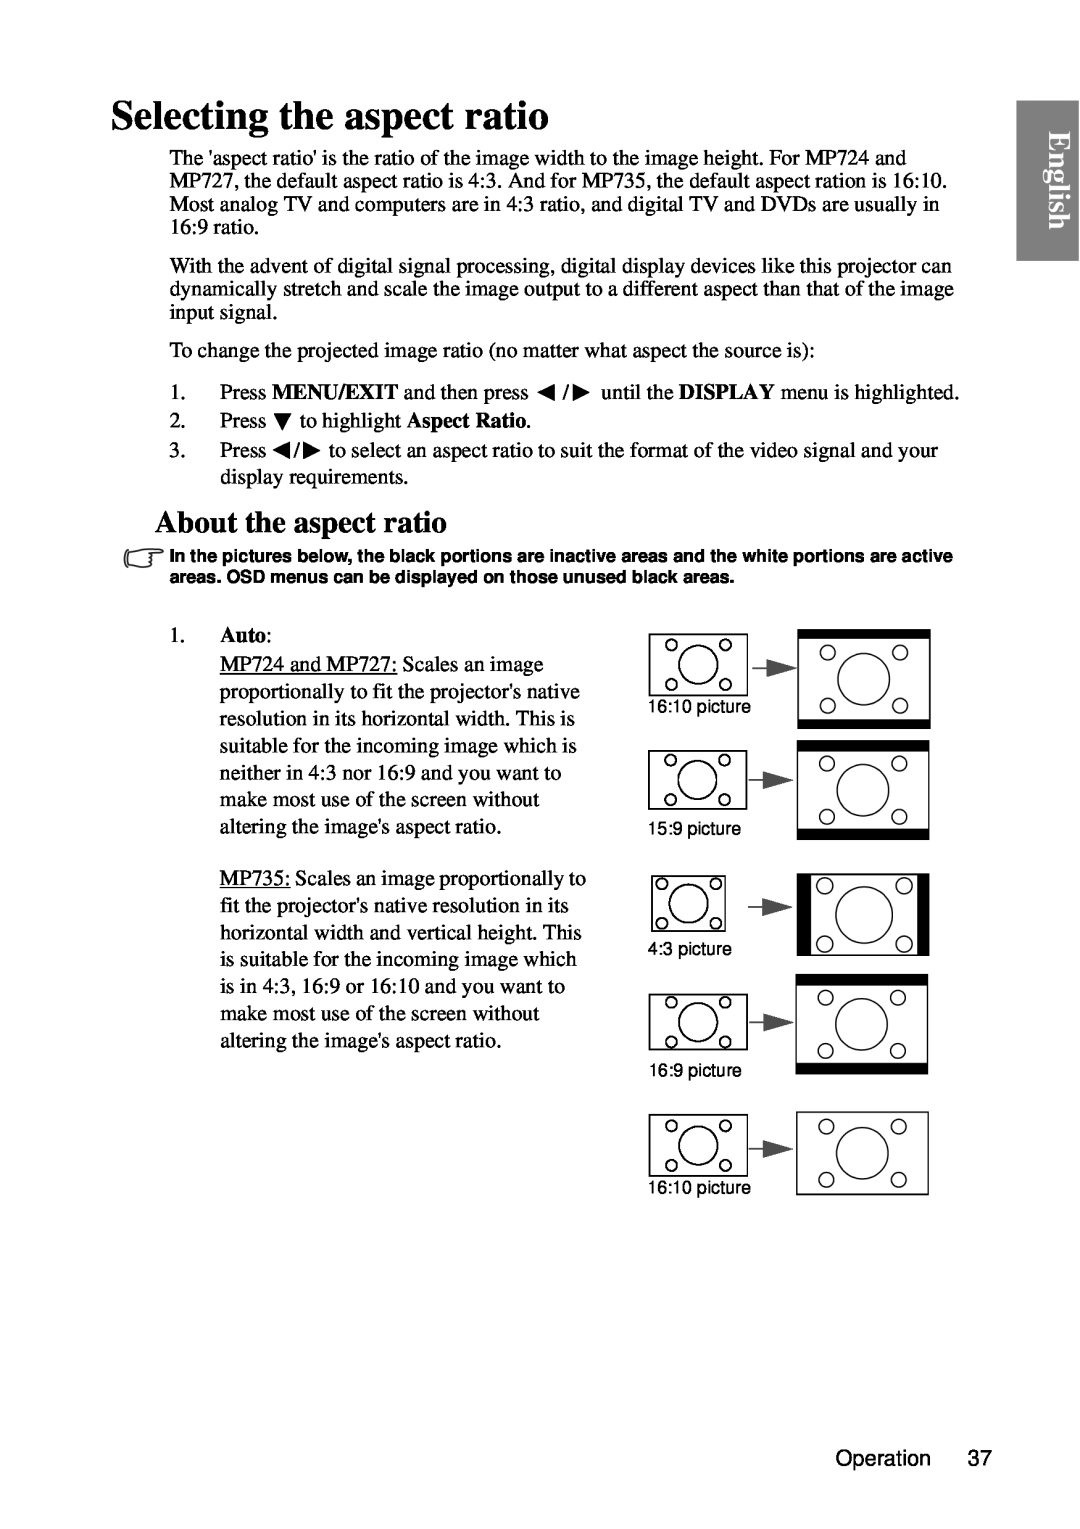 BenQ MP727, MP735 user manual Selecting the aspect ratio, About the aspect ratio, English 